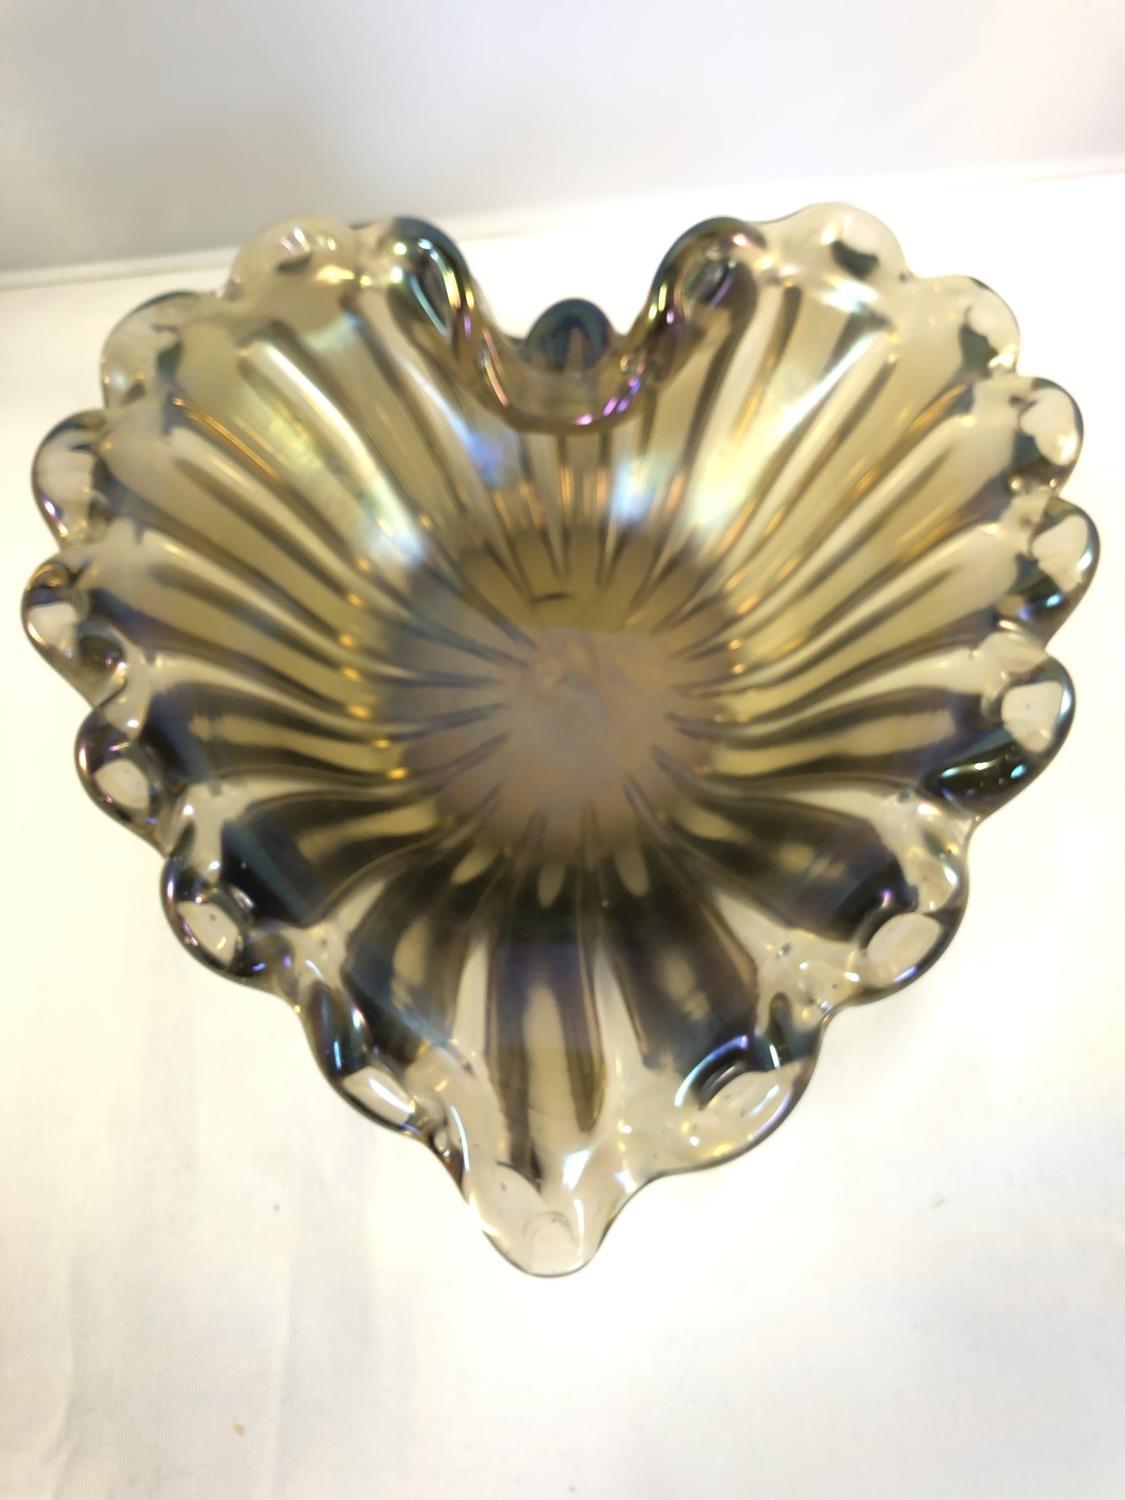 Barovier & Toso - An iridescent golden amethyst glass heart form bowl, Italian, 20th Century, 24cm - Image 6 of 10